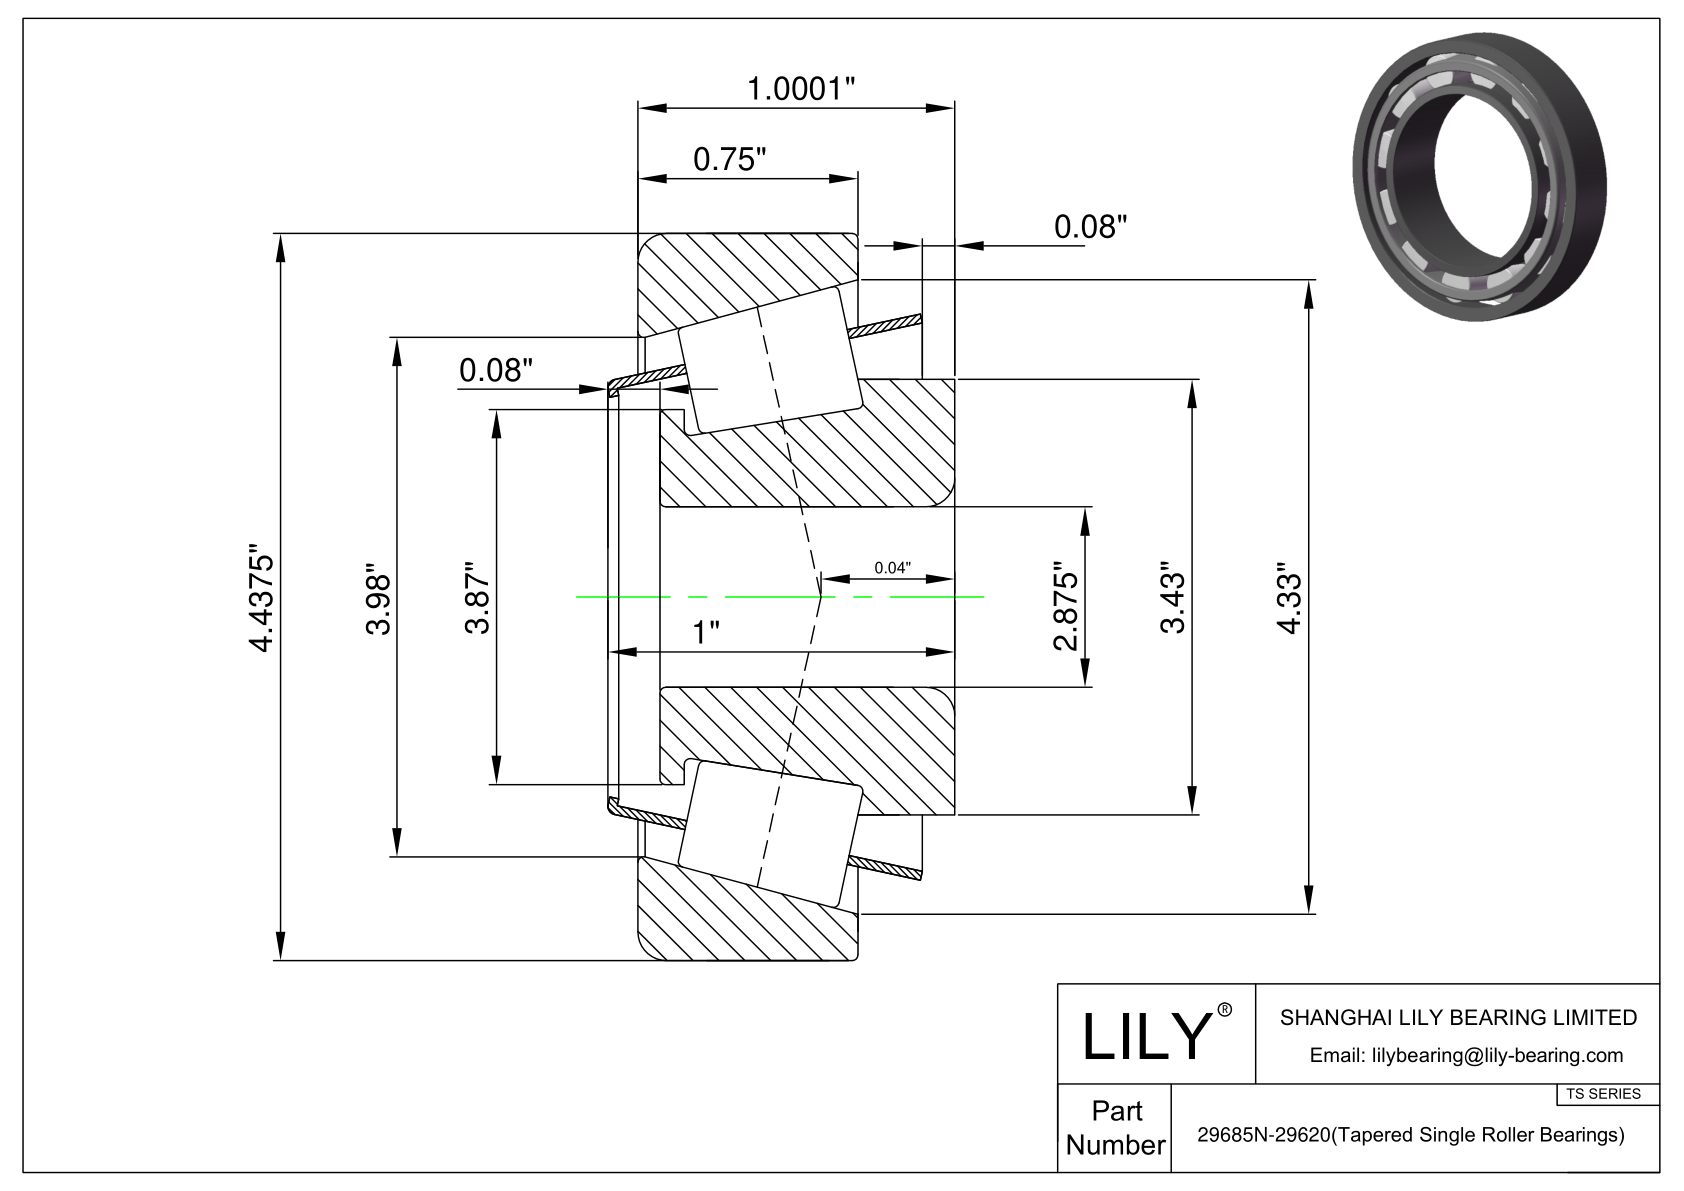 29685N-29620 TS (Tapered Single Roller Bearings) (Imperial) cad drawing